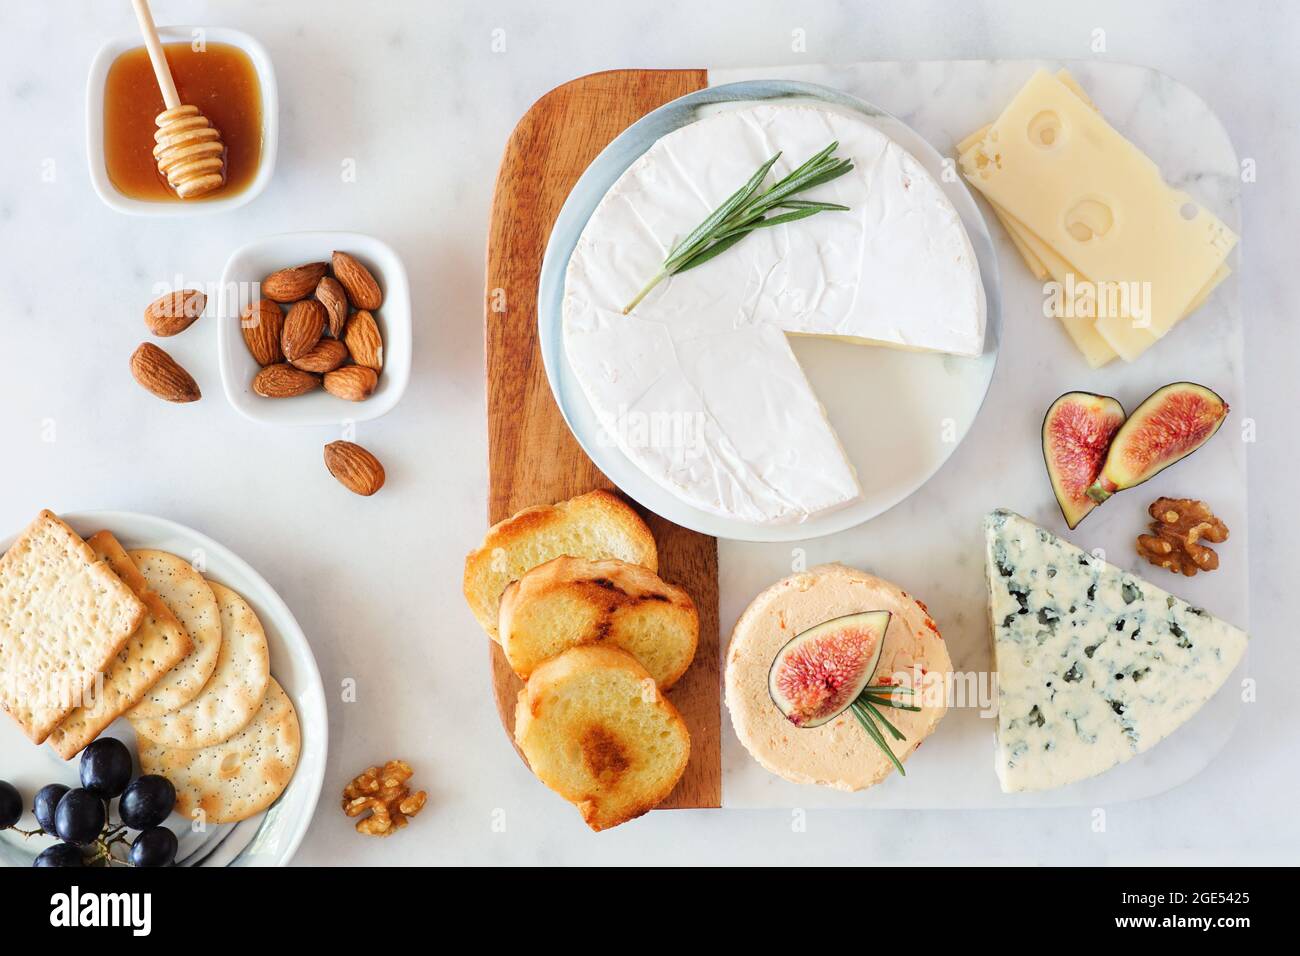 Cheese platter with a selection a cheeses, crackers, figs, nuts and honey. Overhead table scene on a bright background. Stock Photo